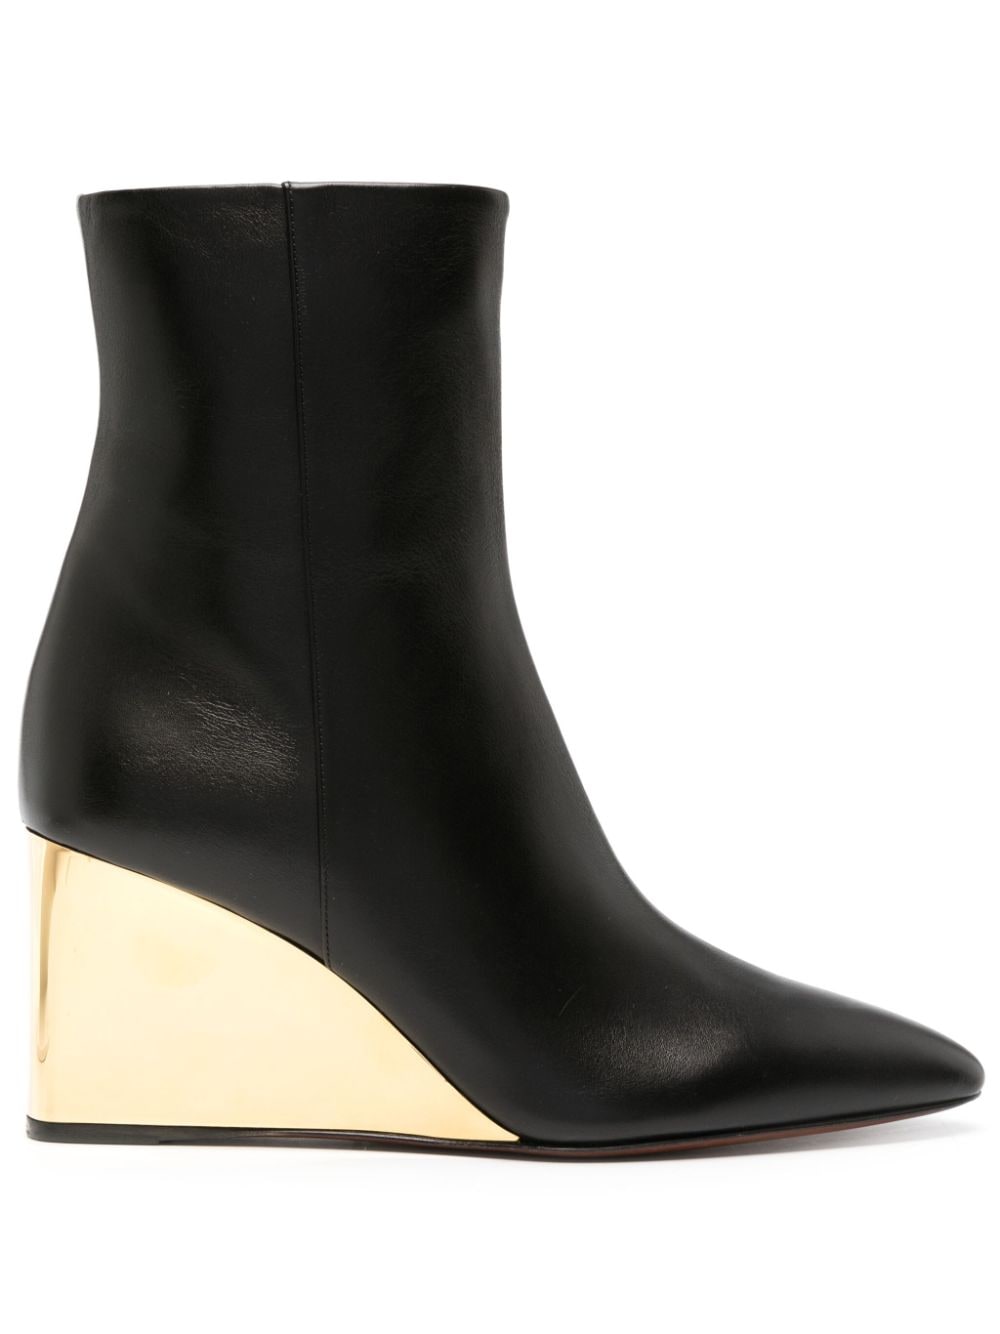 Image 1 of Chloé Rebecca 70mm wedge boots